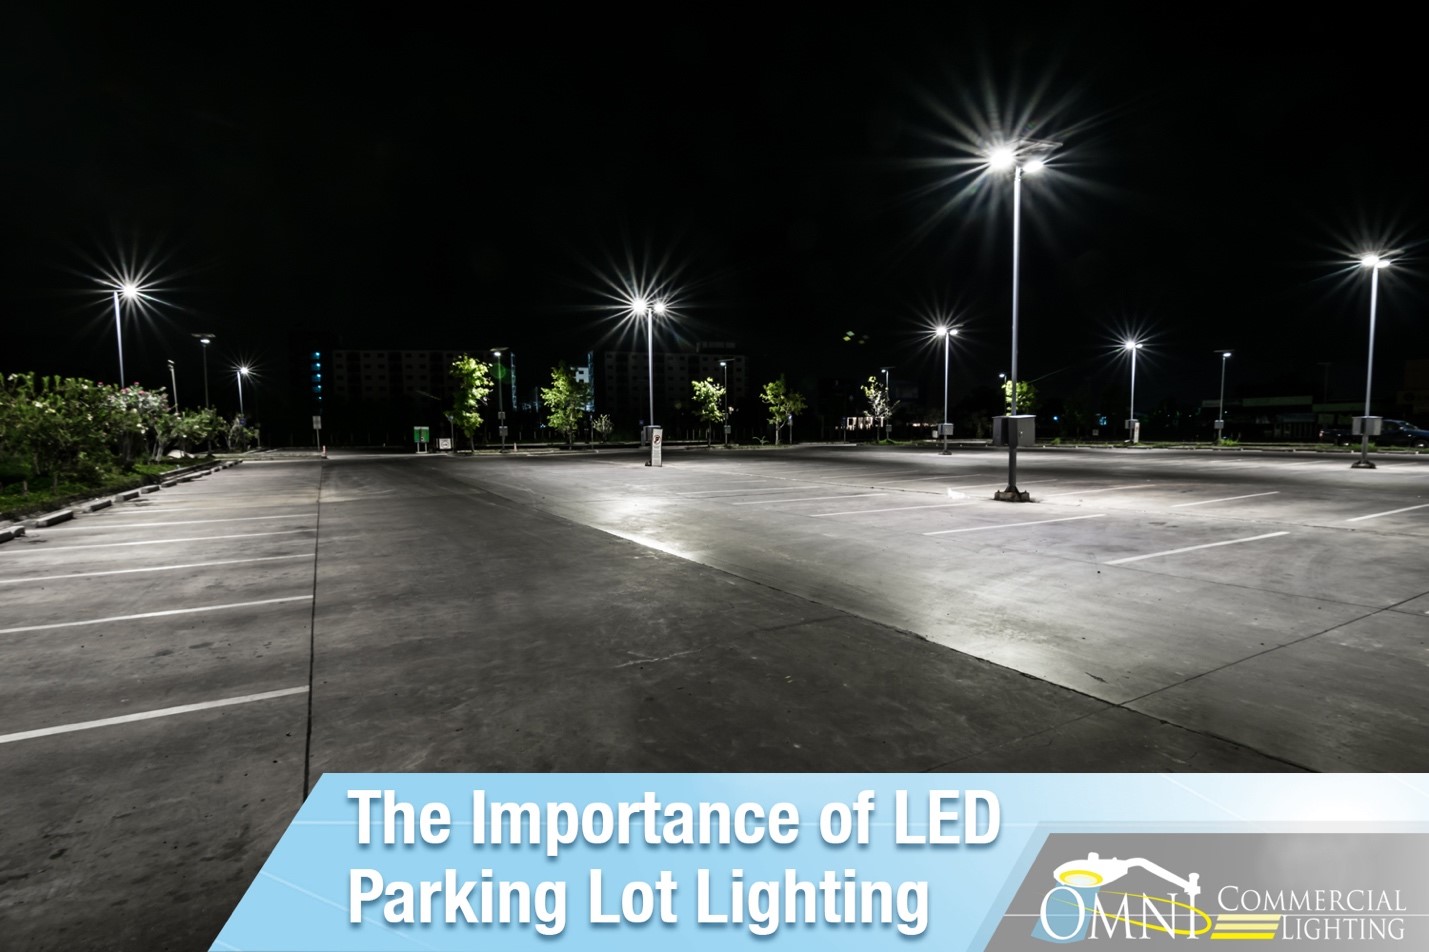 The Importance of LED Parking Lot Lighting